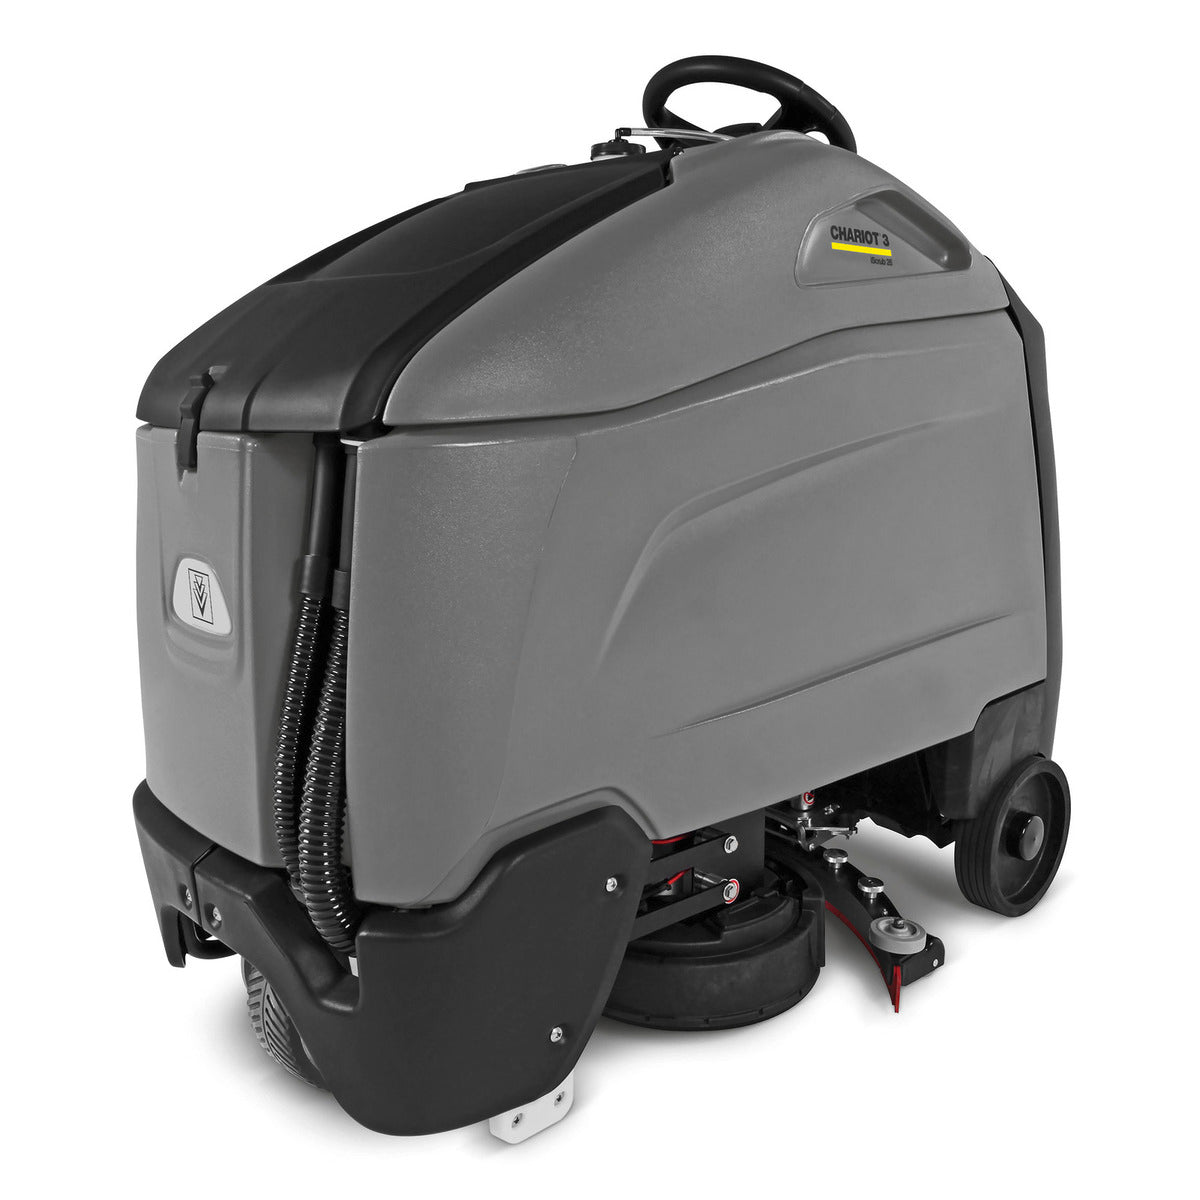 Karcher Chariot™ 3 ISCRUB 26, Floor Scrubber, 26", 25 Gallon, Battery, Ride On, Disk